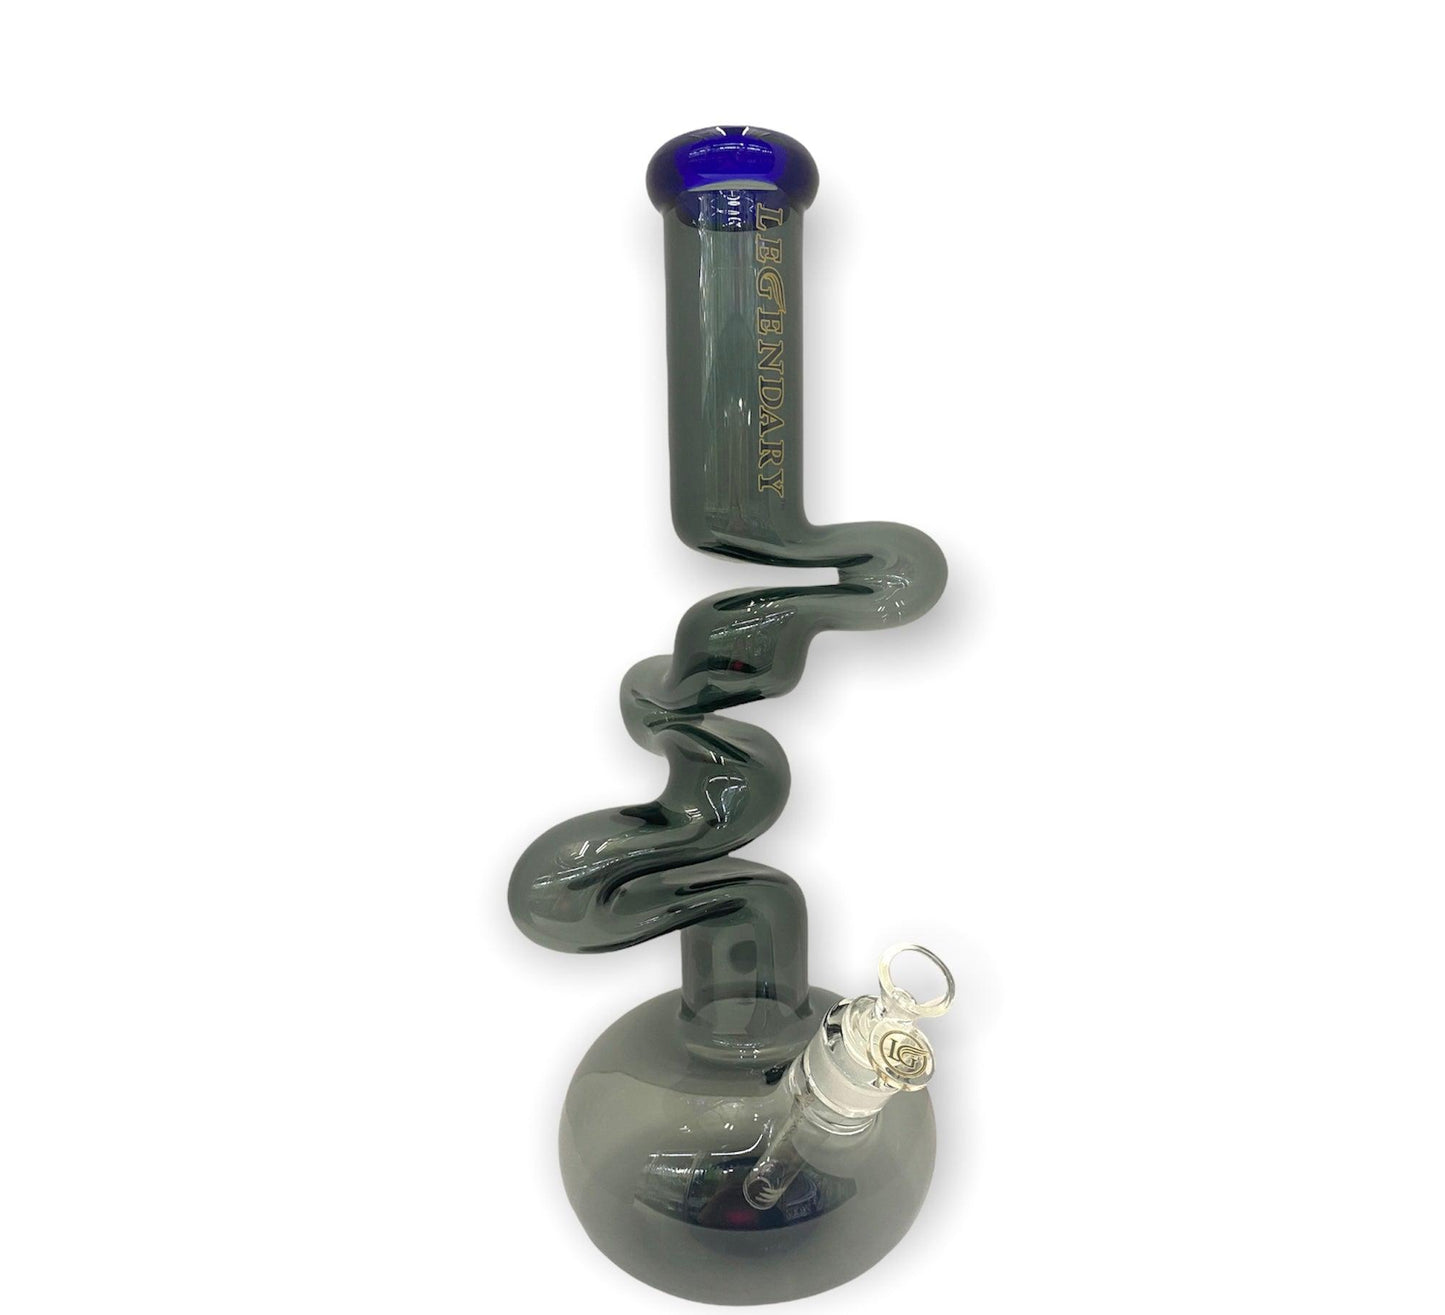 Legendary 16" 3 Tier Colored Zong